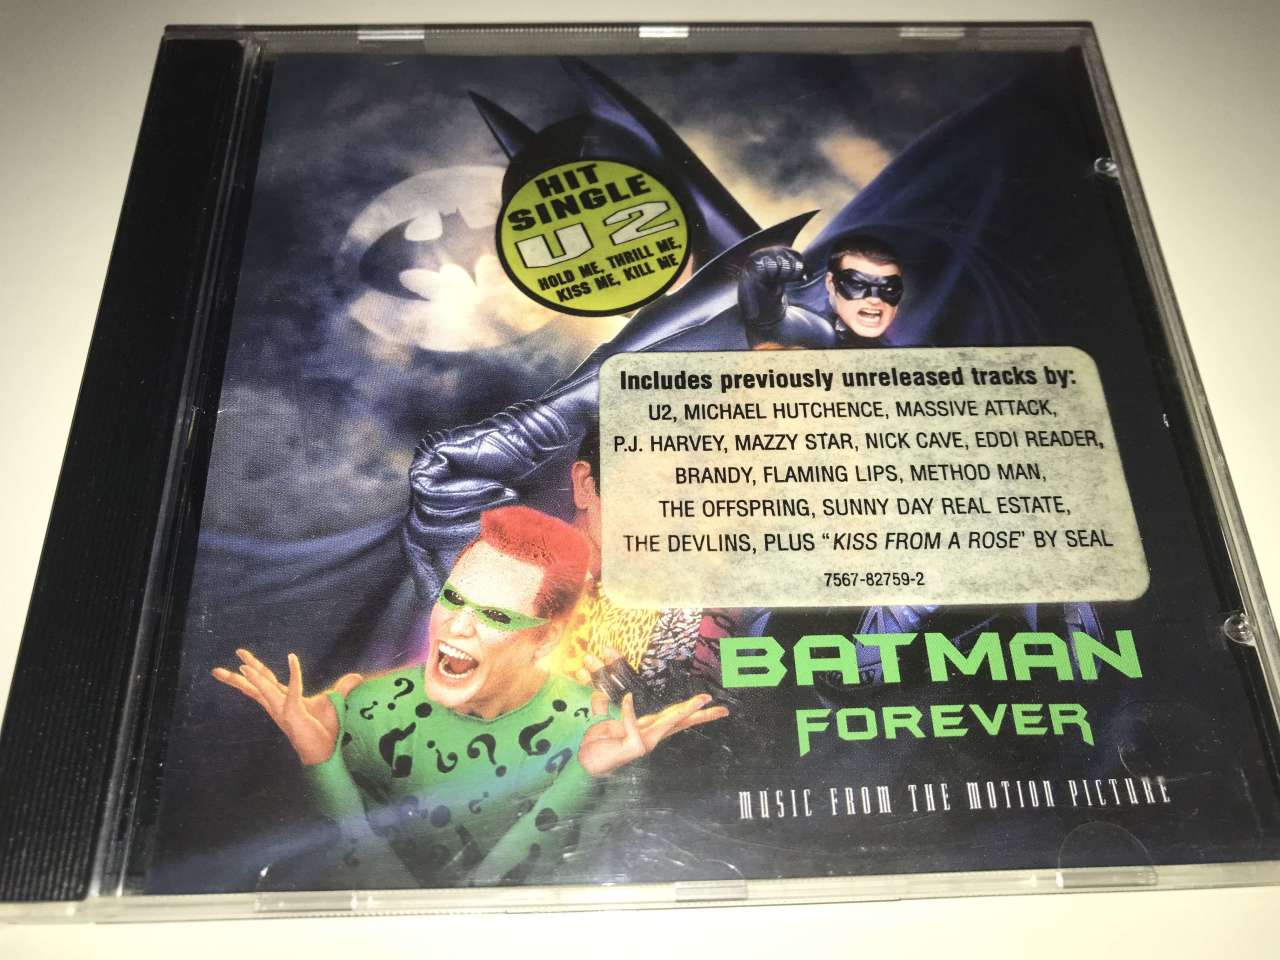 Batman Forever: Music From The Motion Picture